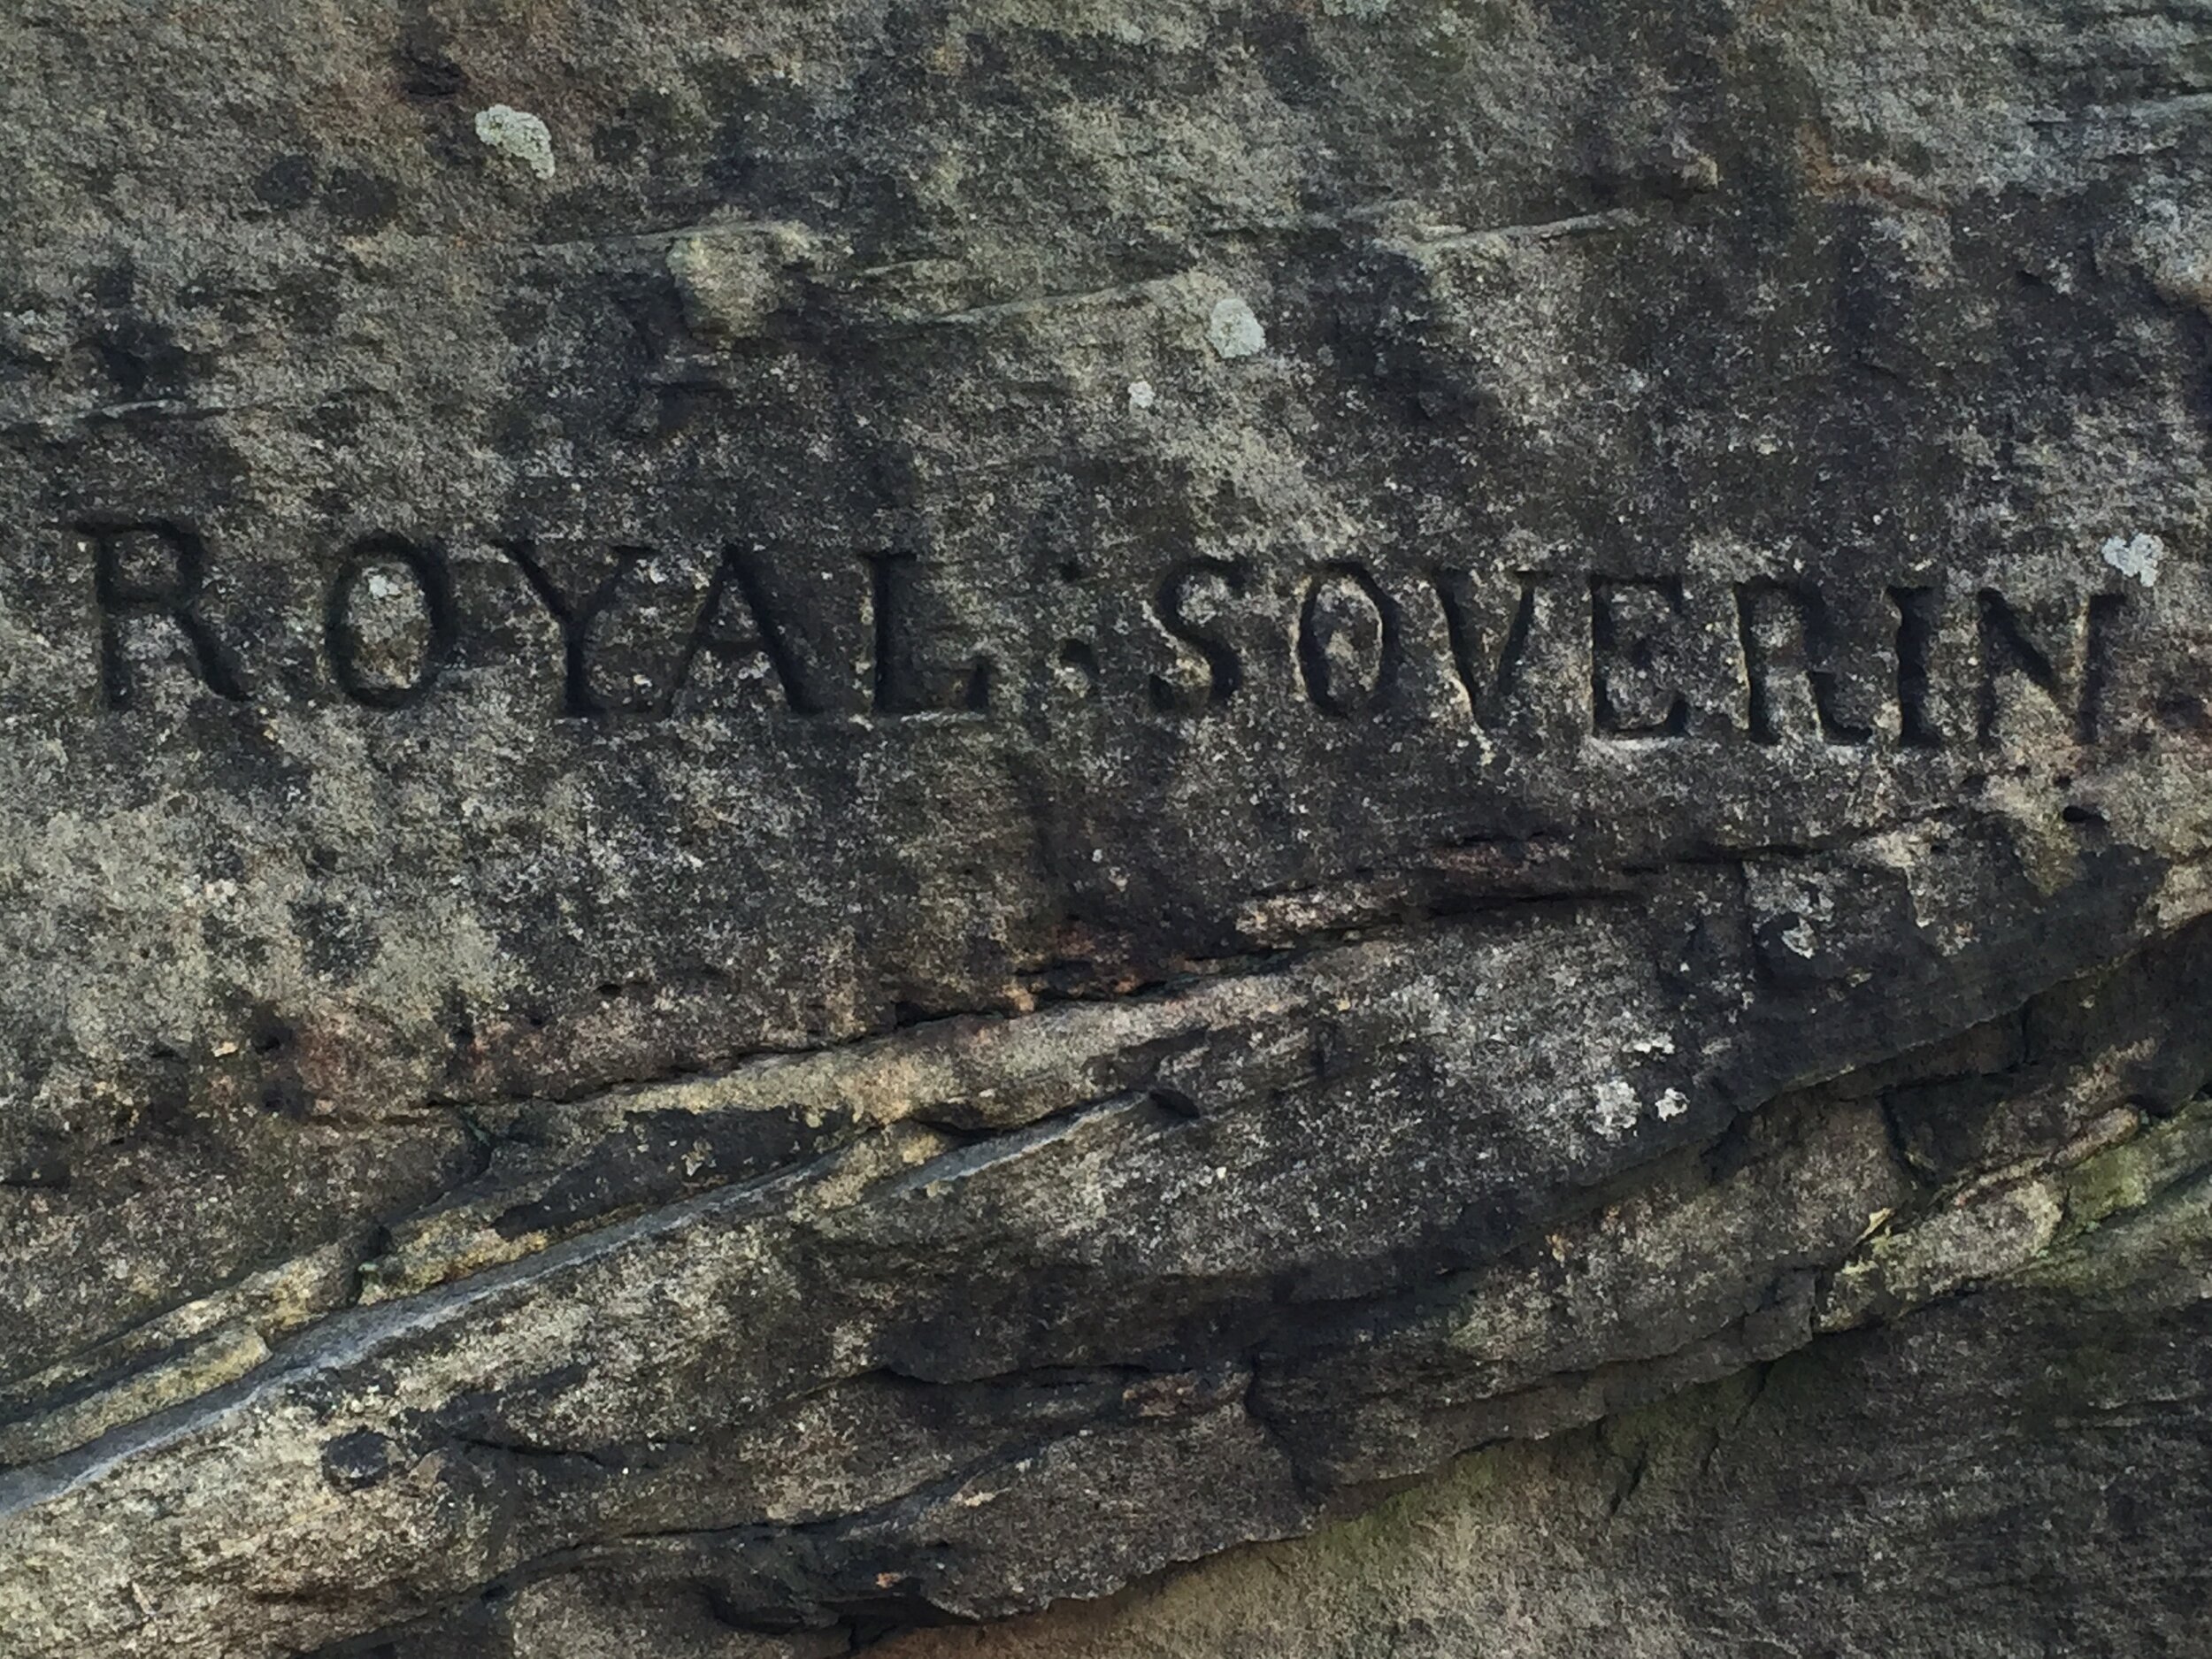  A close-up of the inscription ‘Royal; Soverin’ [sic]. 